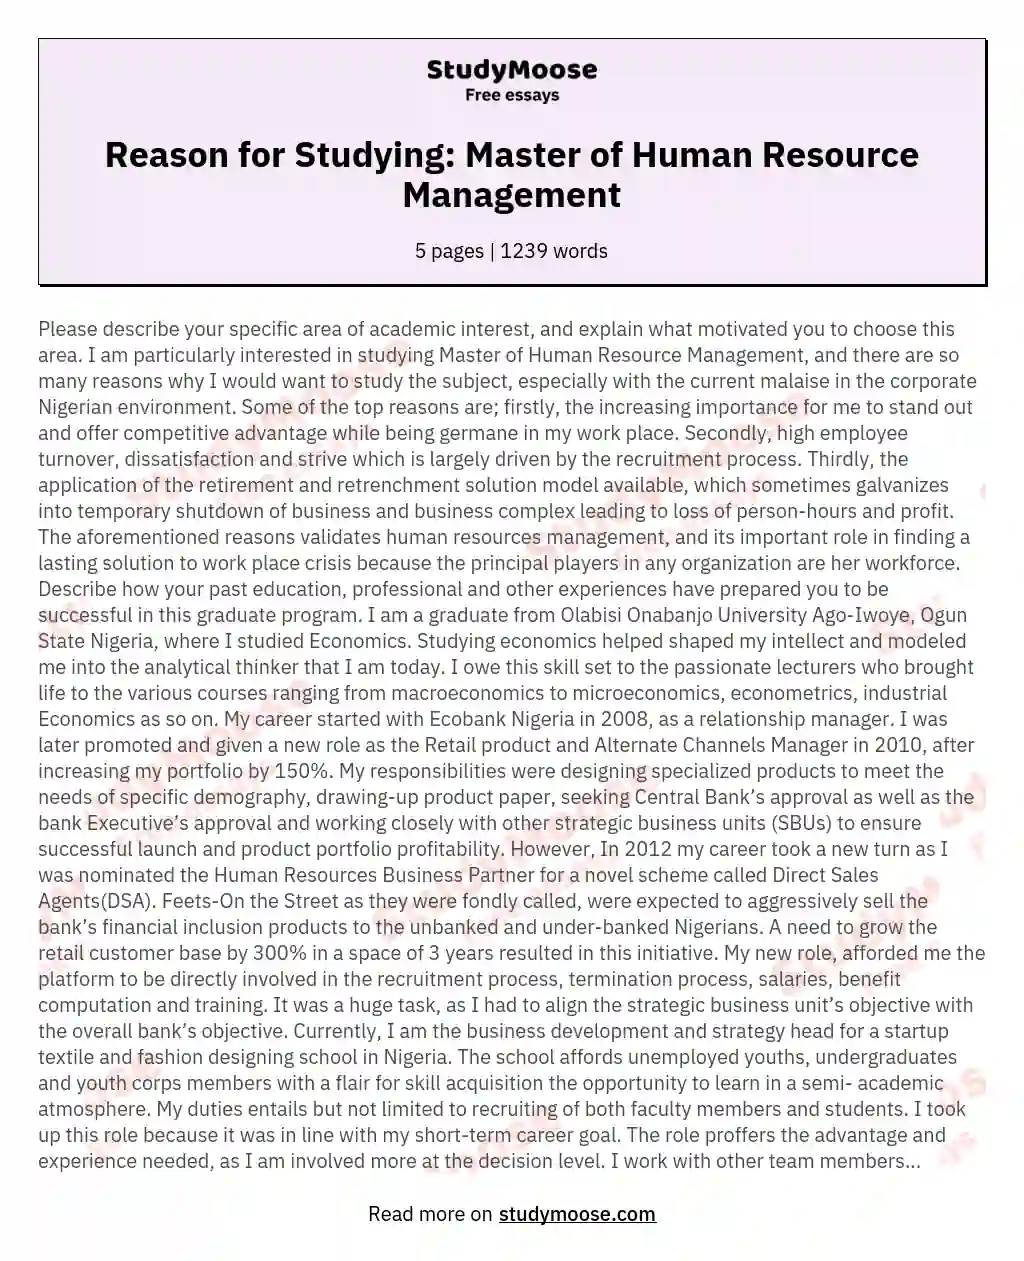 Reason for Studying: Master of Human Resource Management essay